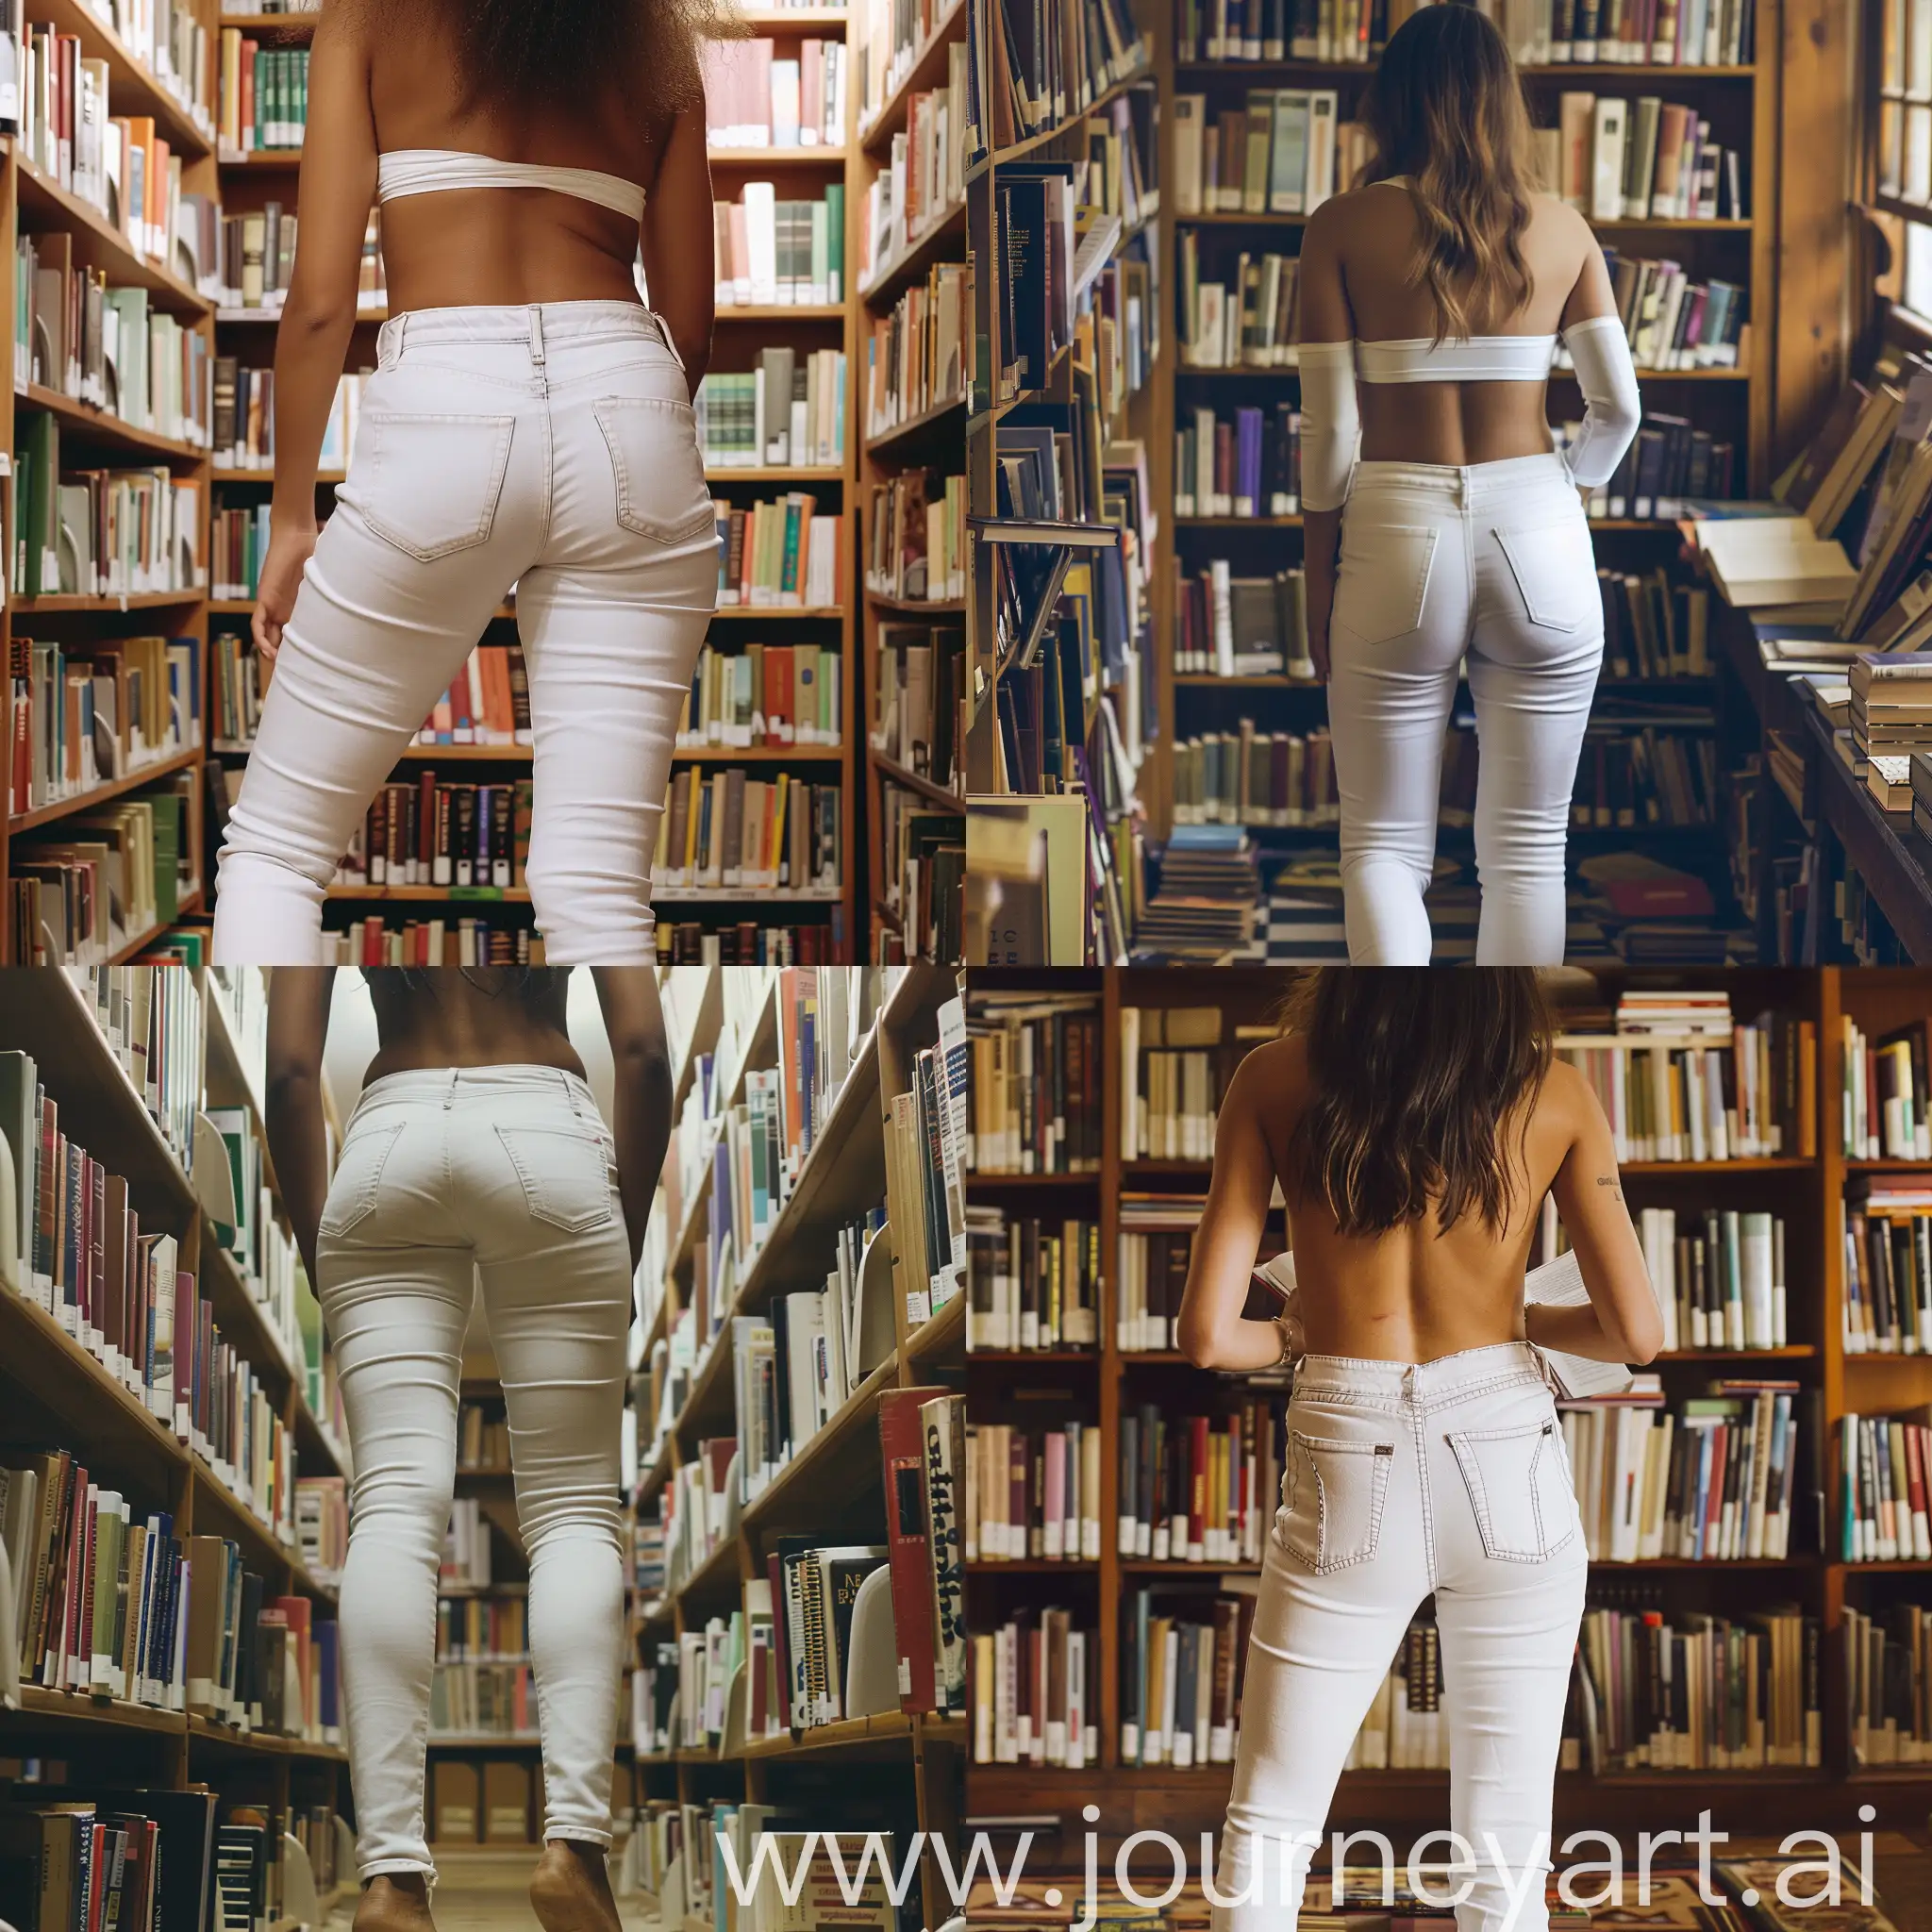 A woman wearing tight white jeans browsing books in the library, her back to the camera, thick legs